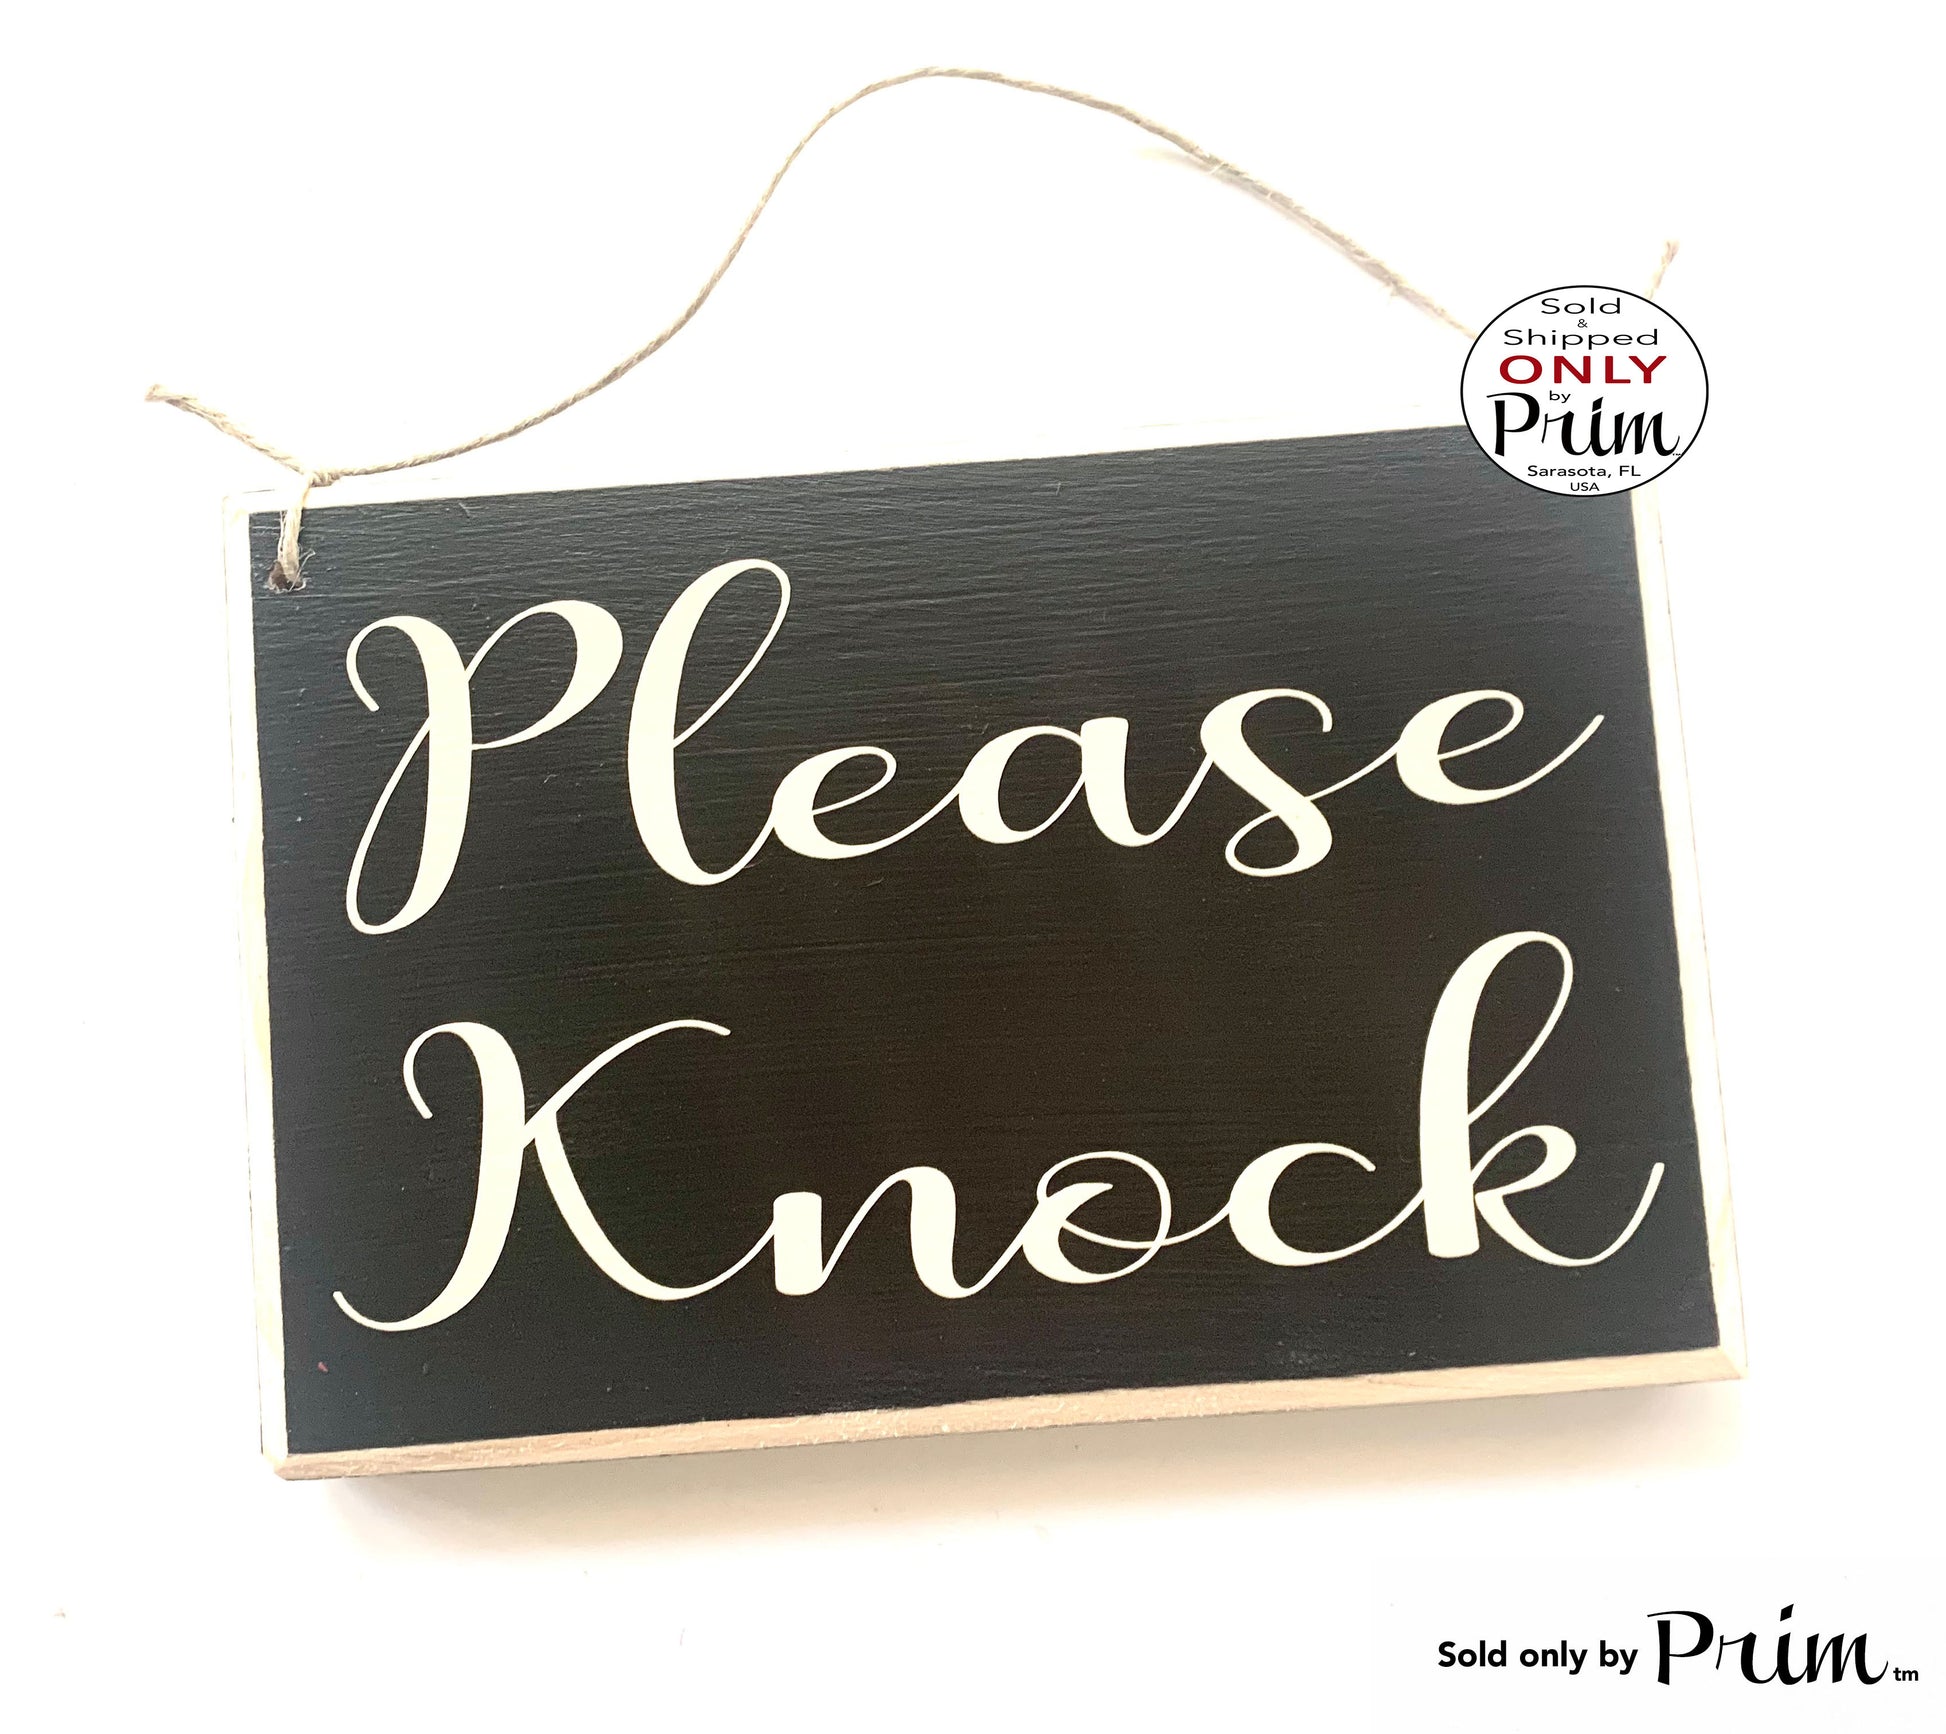 8x6 Please Knock Custom Wood Sign Soft Voices In Session In Progress Shhh Baby Sleeping Do Not Disturb Private Welcome Wall Door Plaque